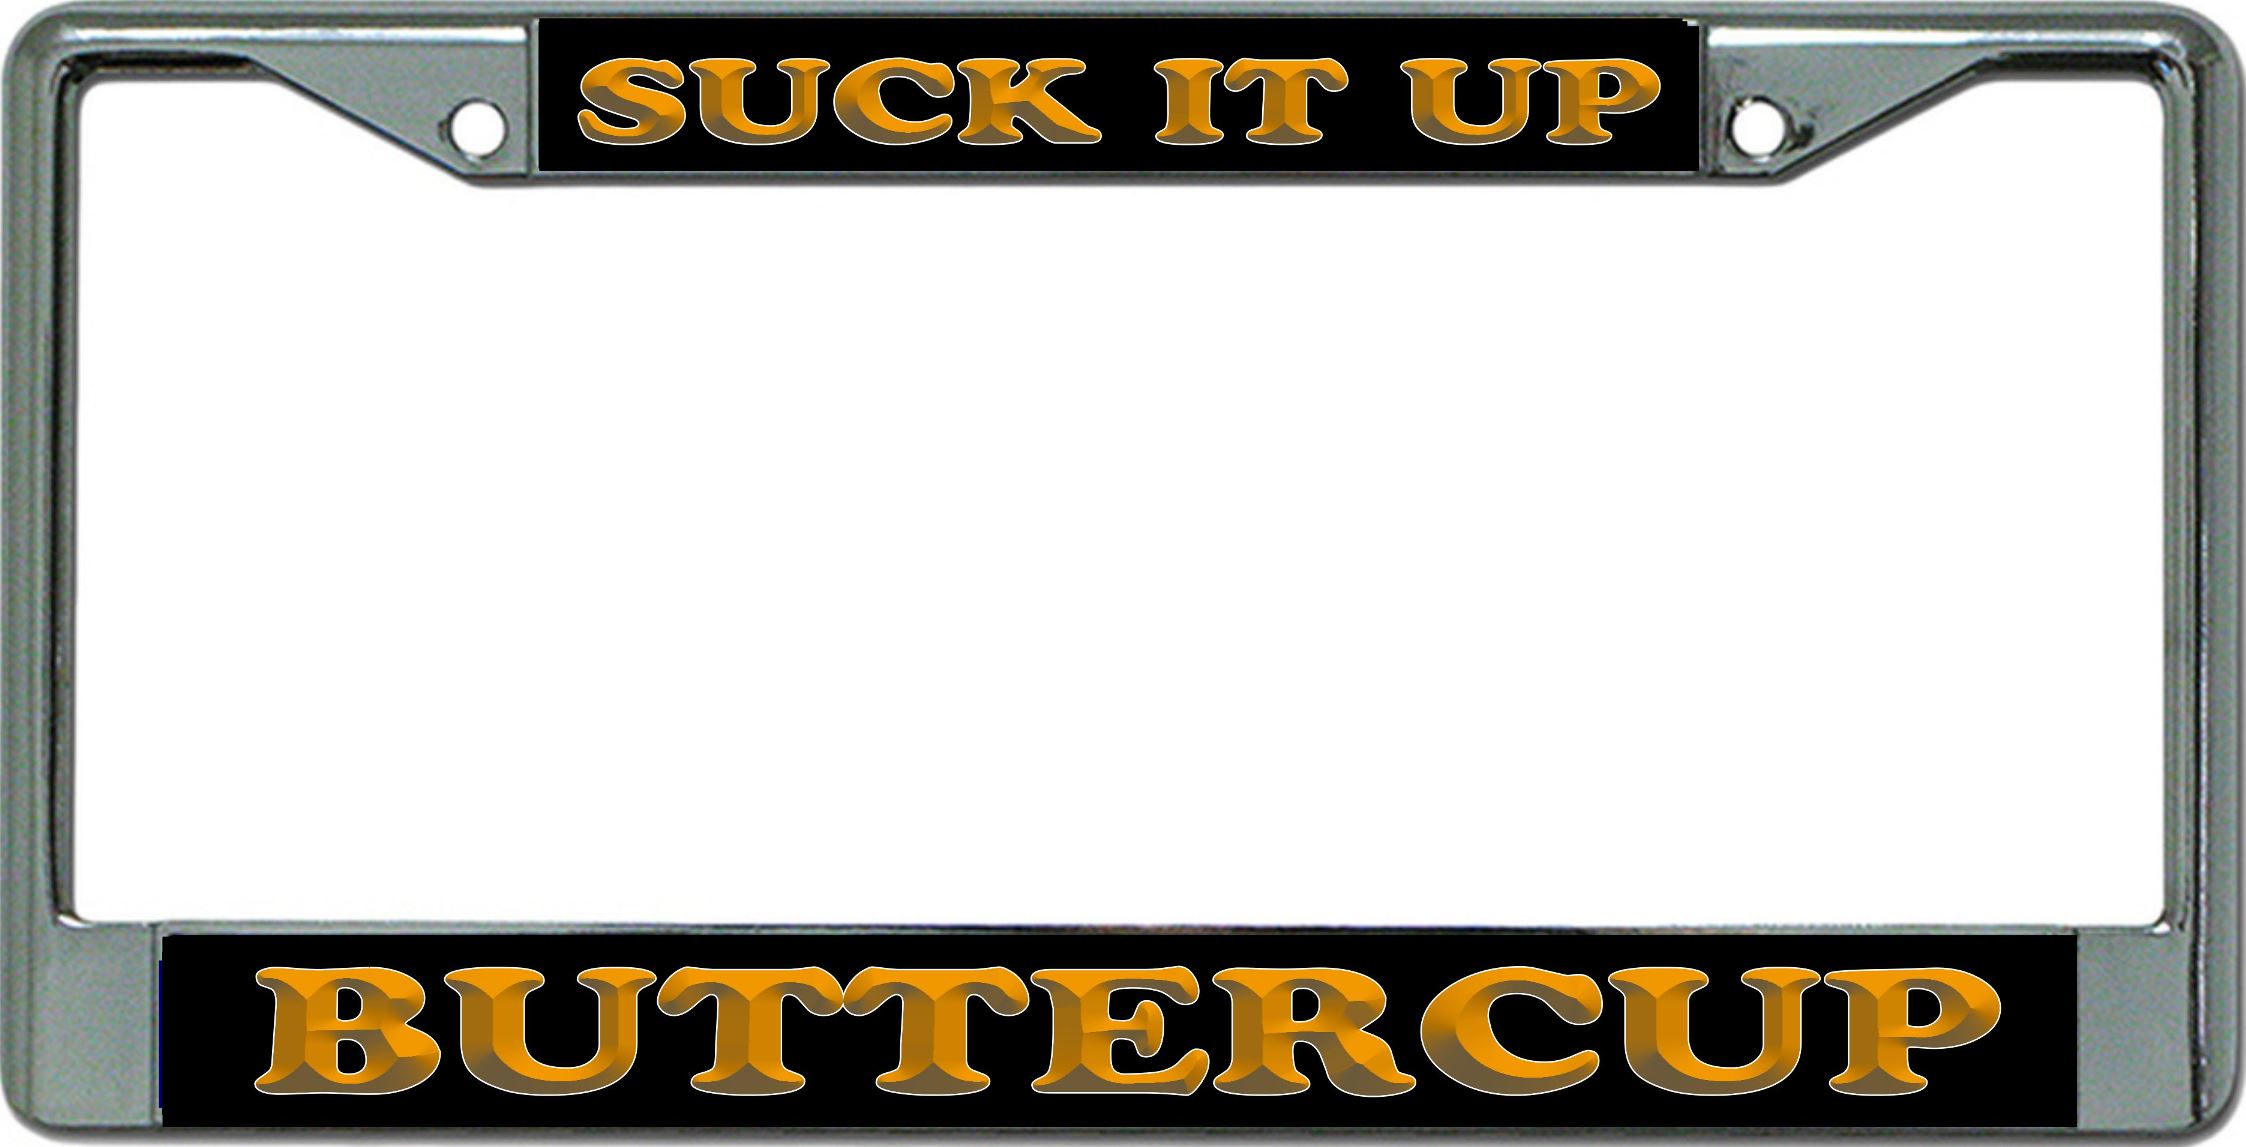 Suck It Up Buttercup Chrome License Plate FRAME